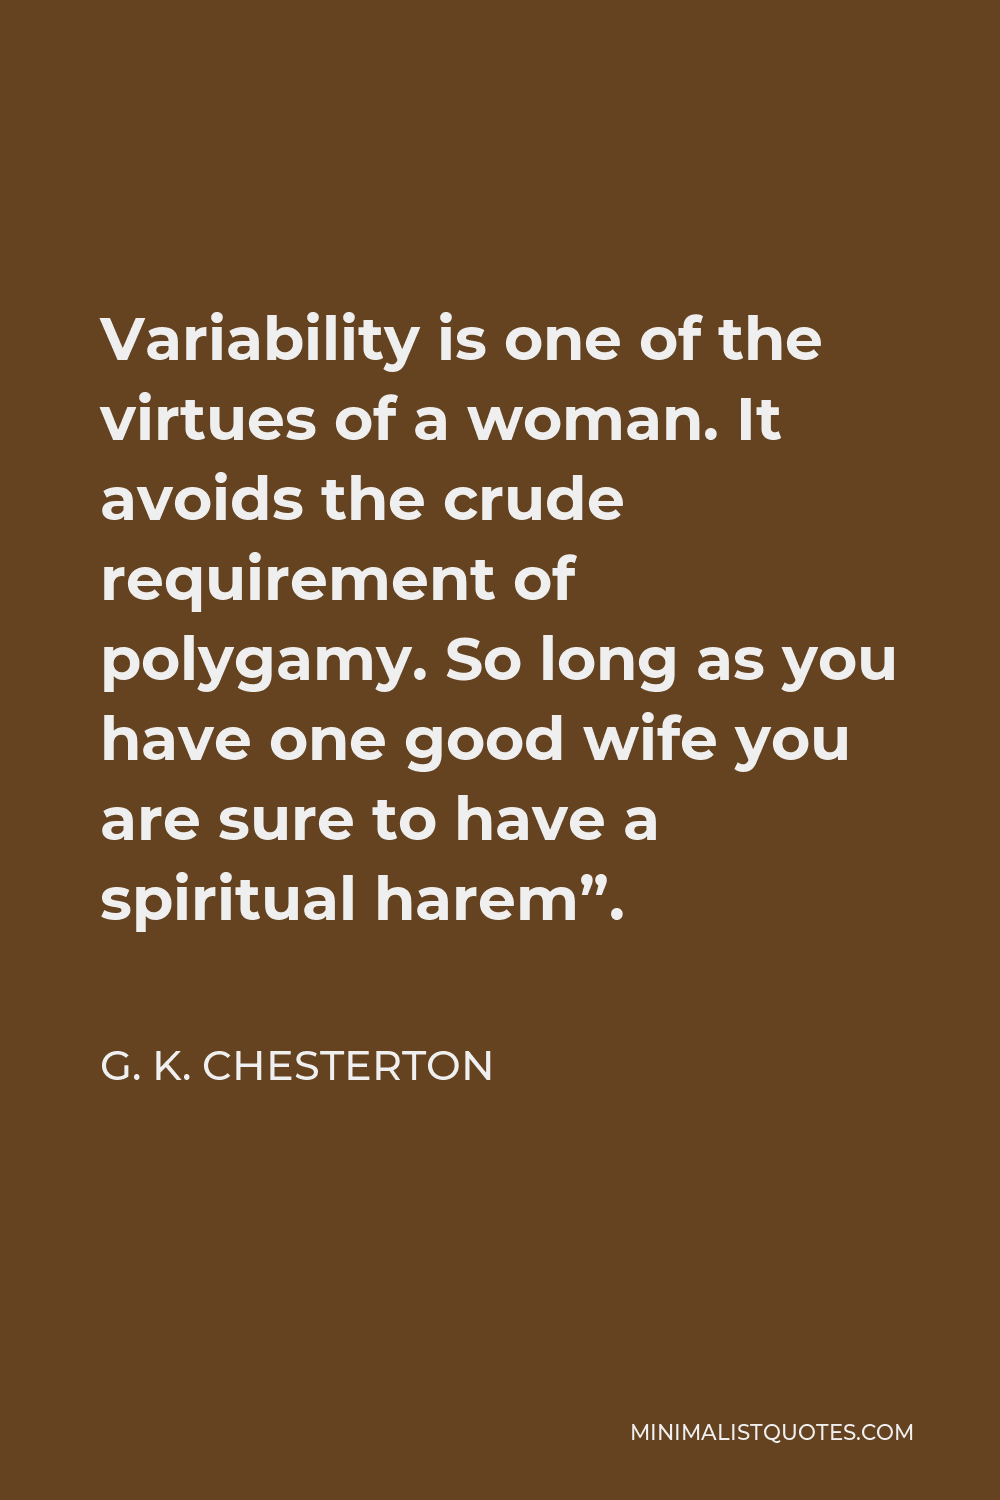 G. K. Chesterton Quote - Variability is one of the virtues of a woman. It avoids the crude requirement of polygamy. So long as you have one good wife you are sure to have a spiritual harem”.